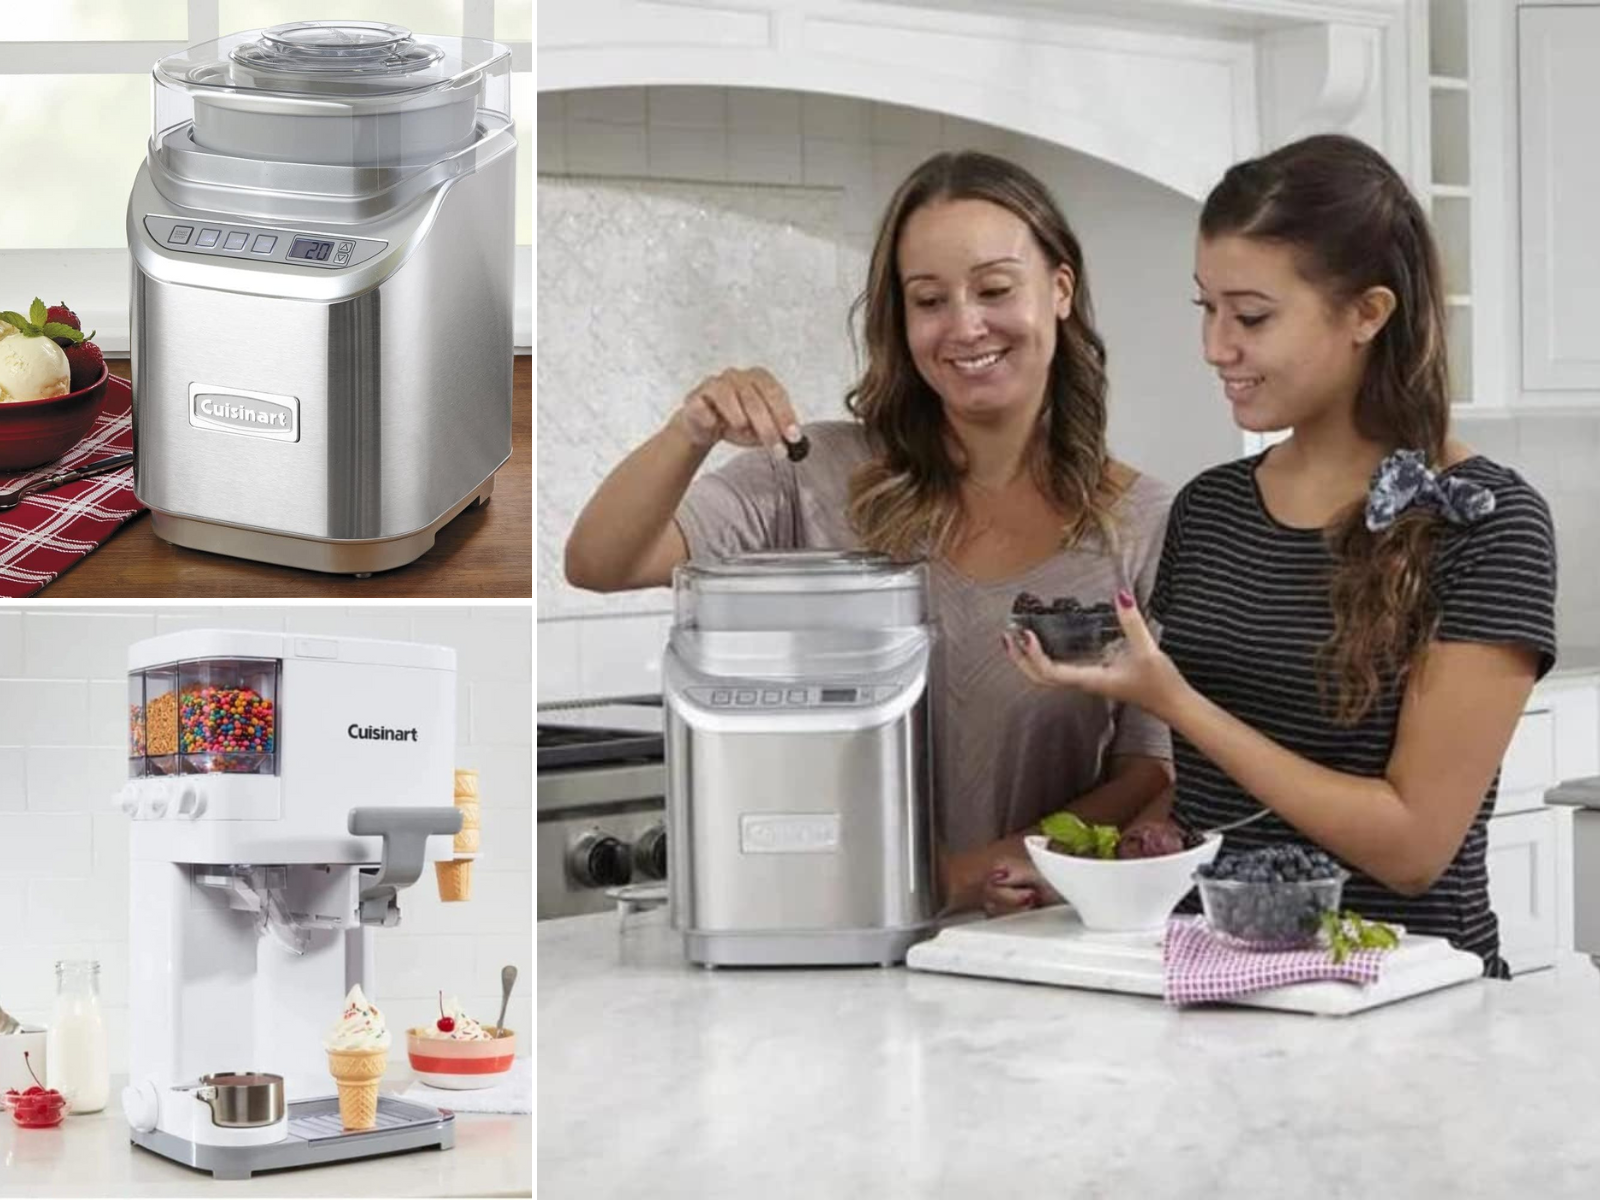 2 women making ice cream with fruit, a maker with toppings, and 1 sitting on a kitchen counter